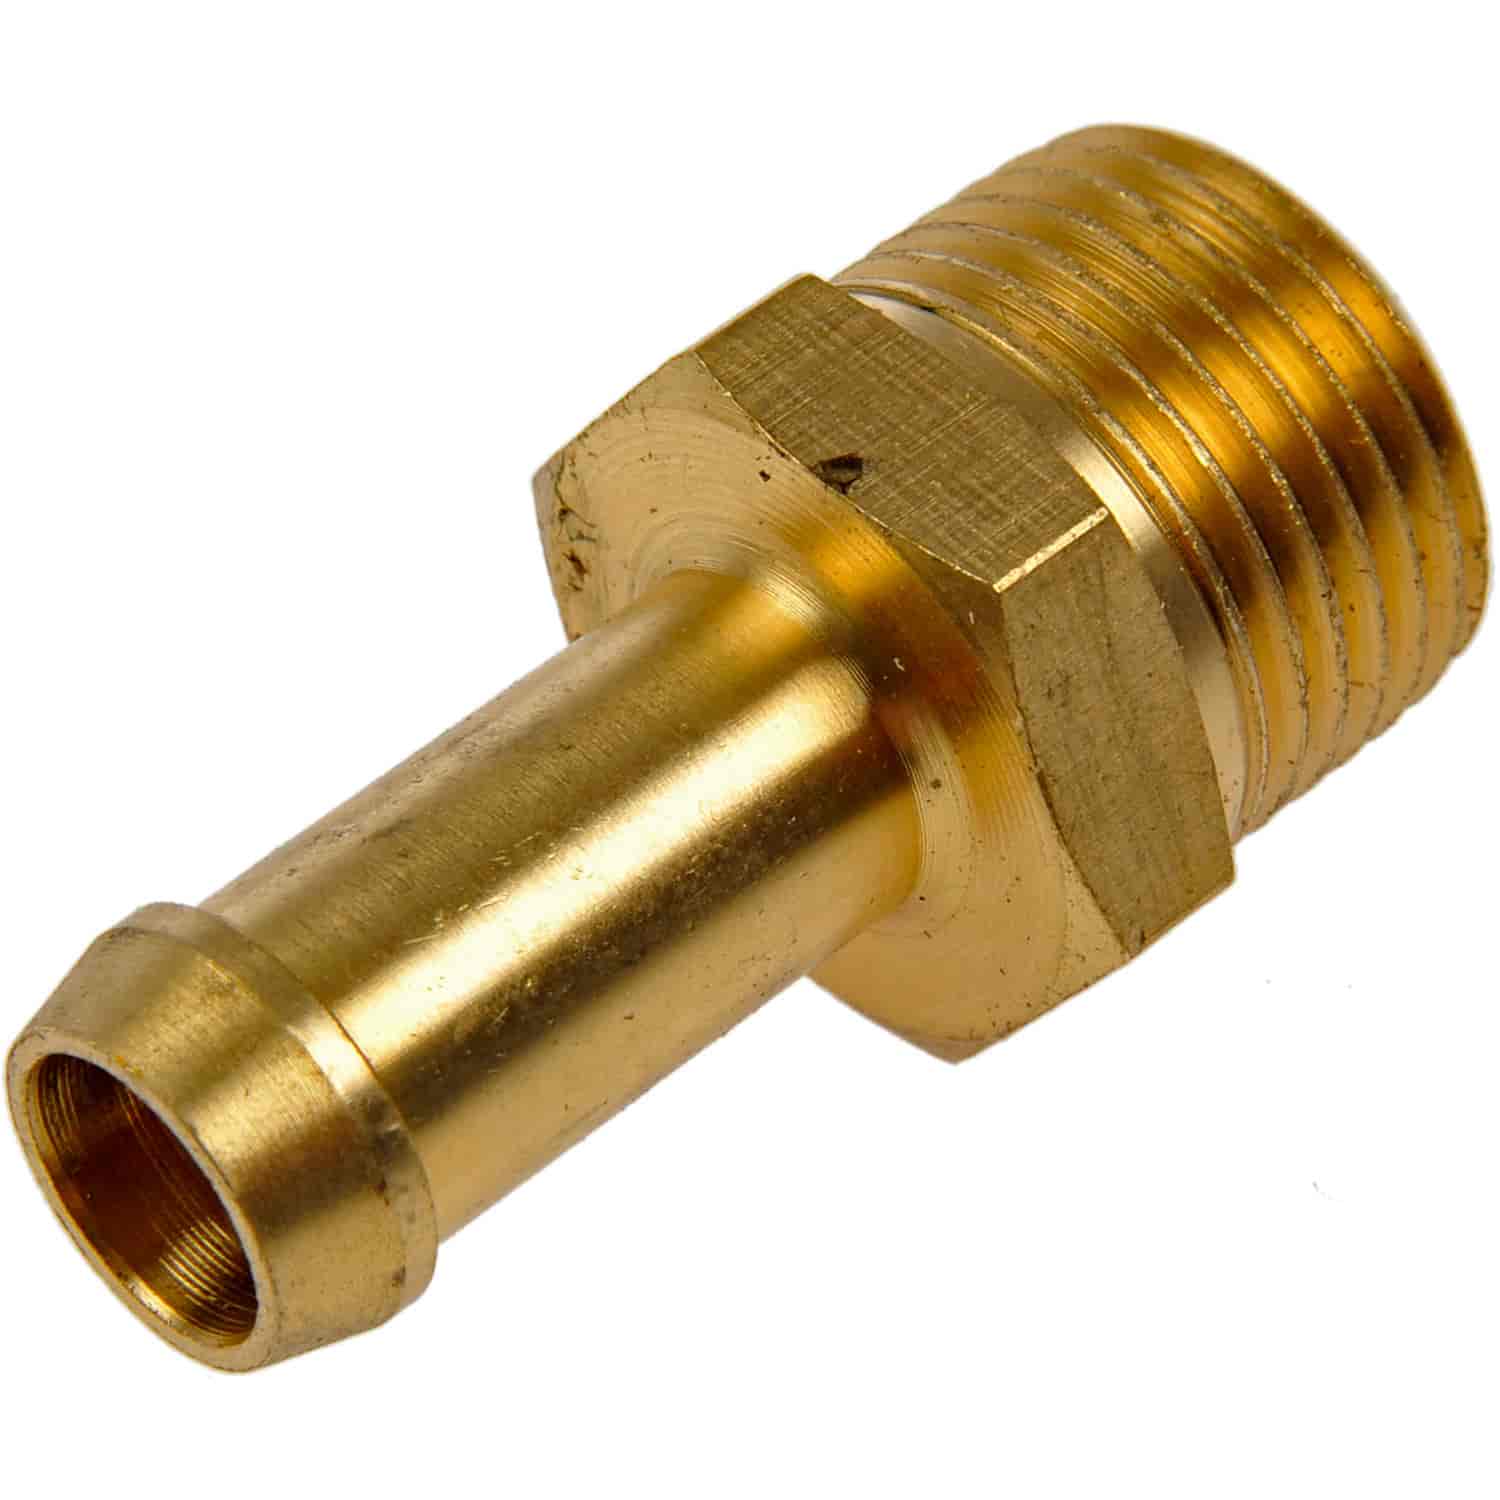 Fuel Hose Fitting-Male Connector-3/8 In. x 3/8 In. MNPT